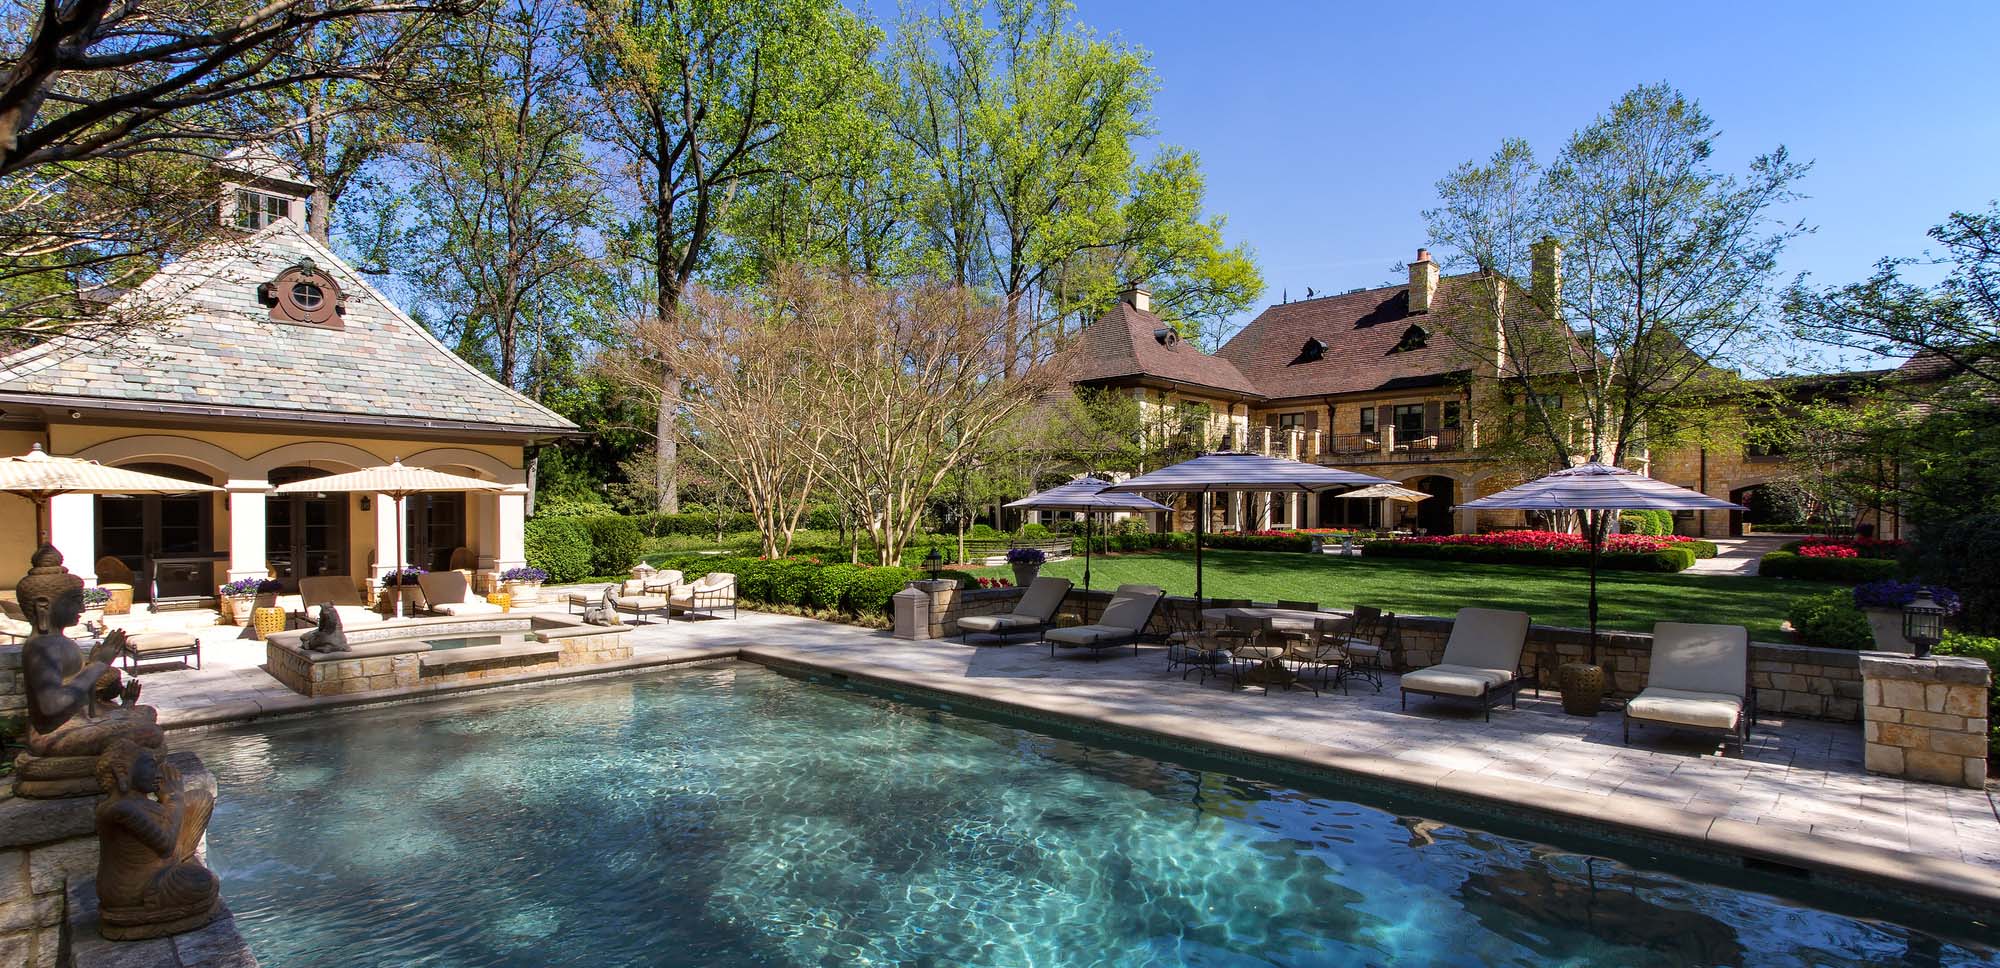 stunning pool house design and mansion real stone hardscaping patio in ground concrete pool